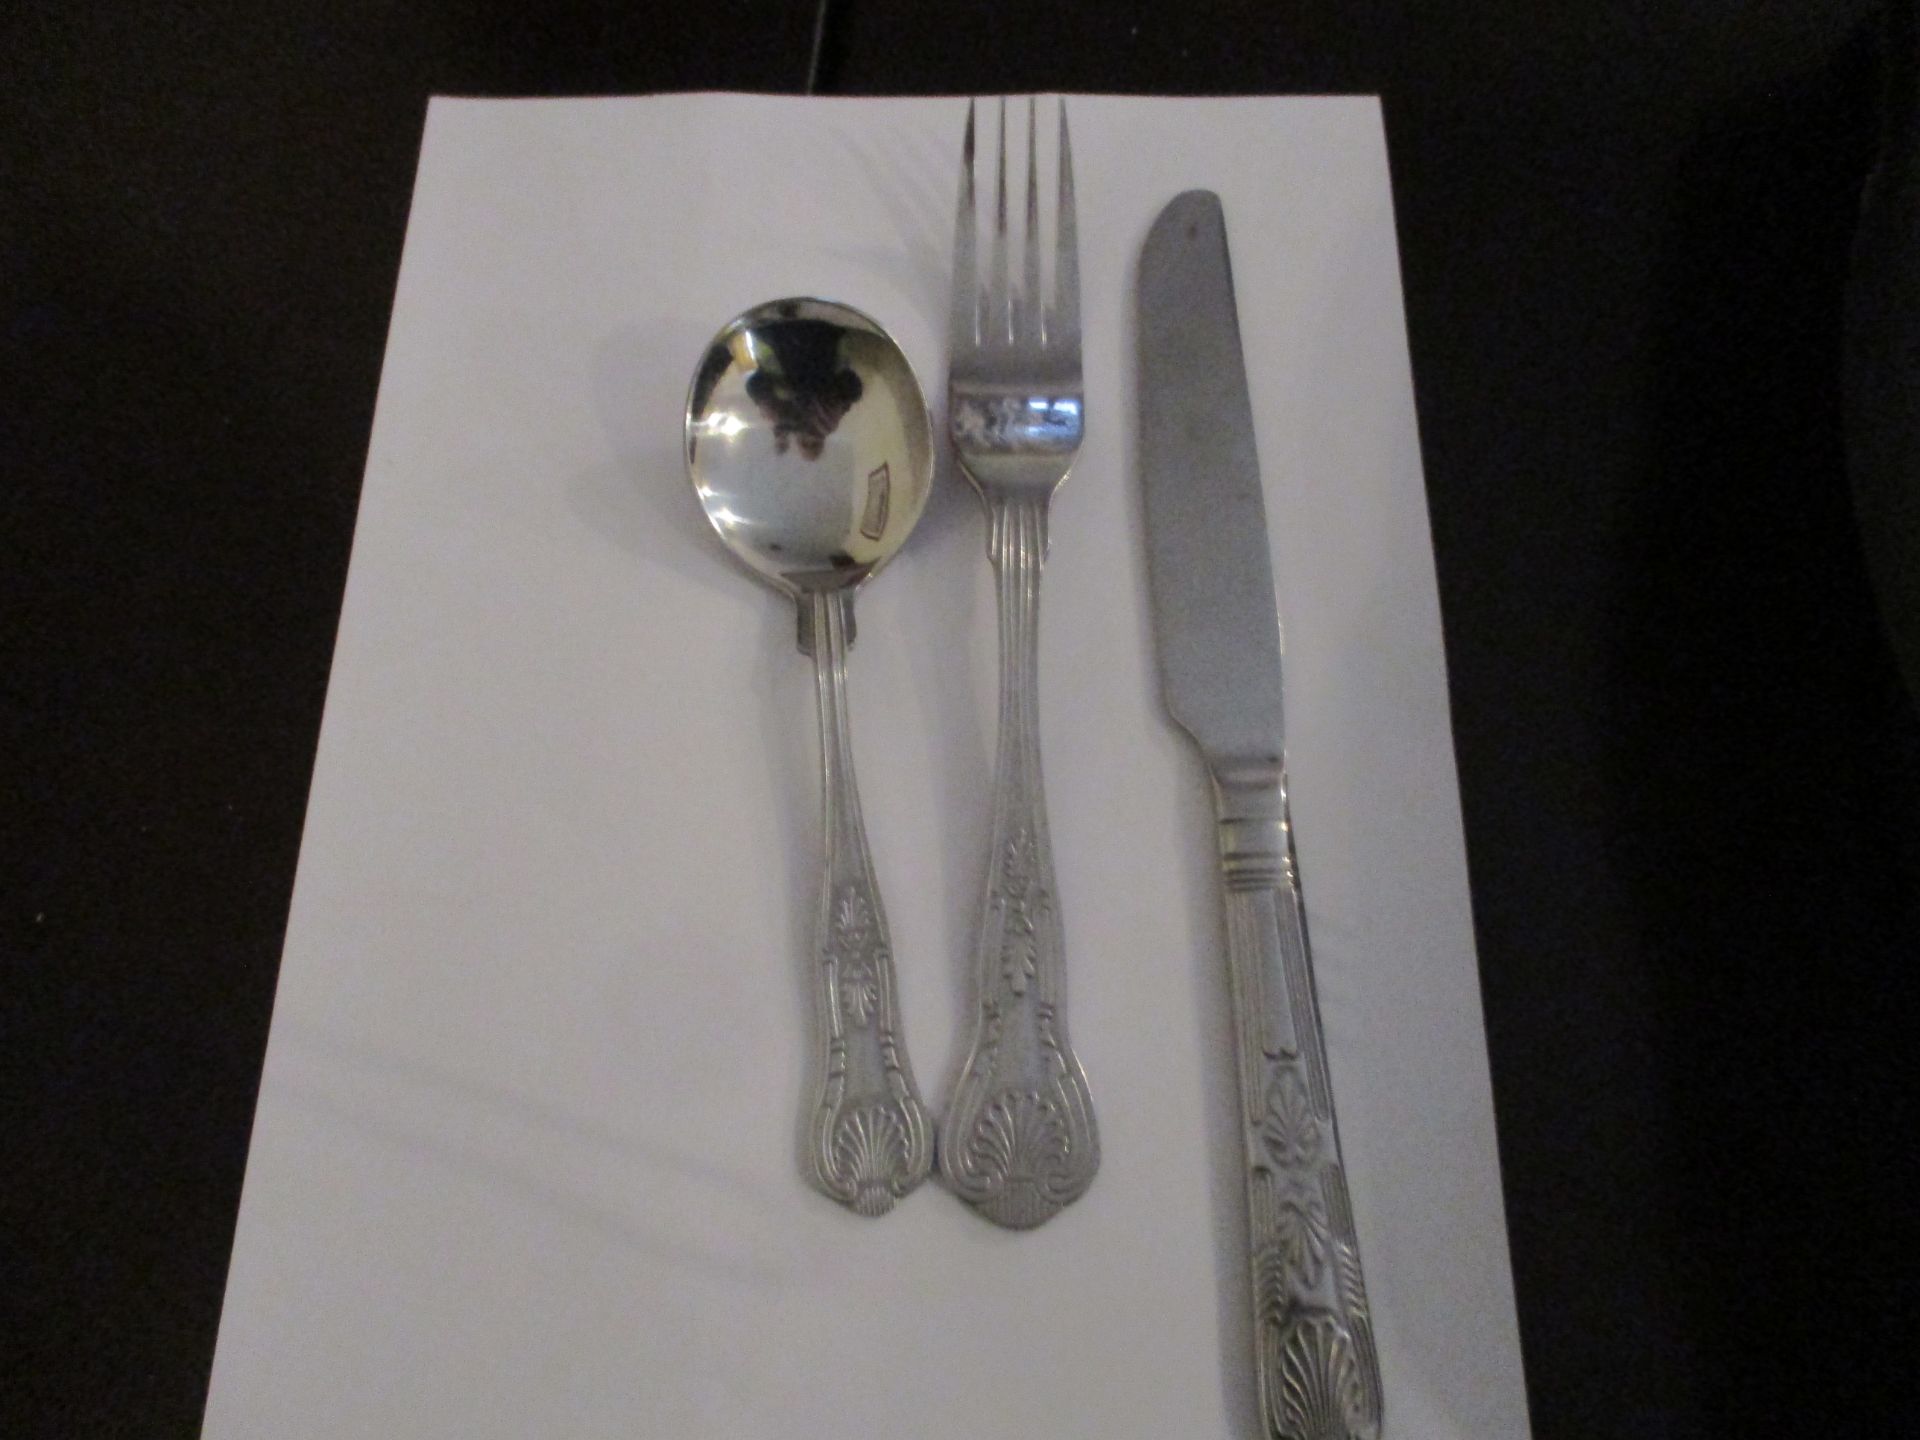 Contents to five trays - approx 585 pieces of King's Pattern stainless steel cutlery - some by